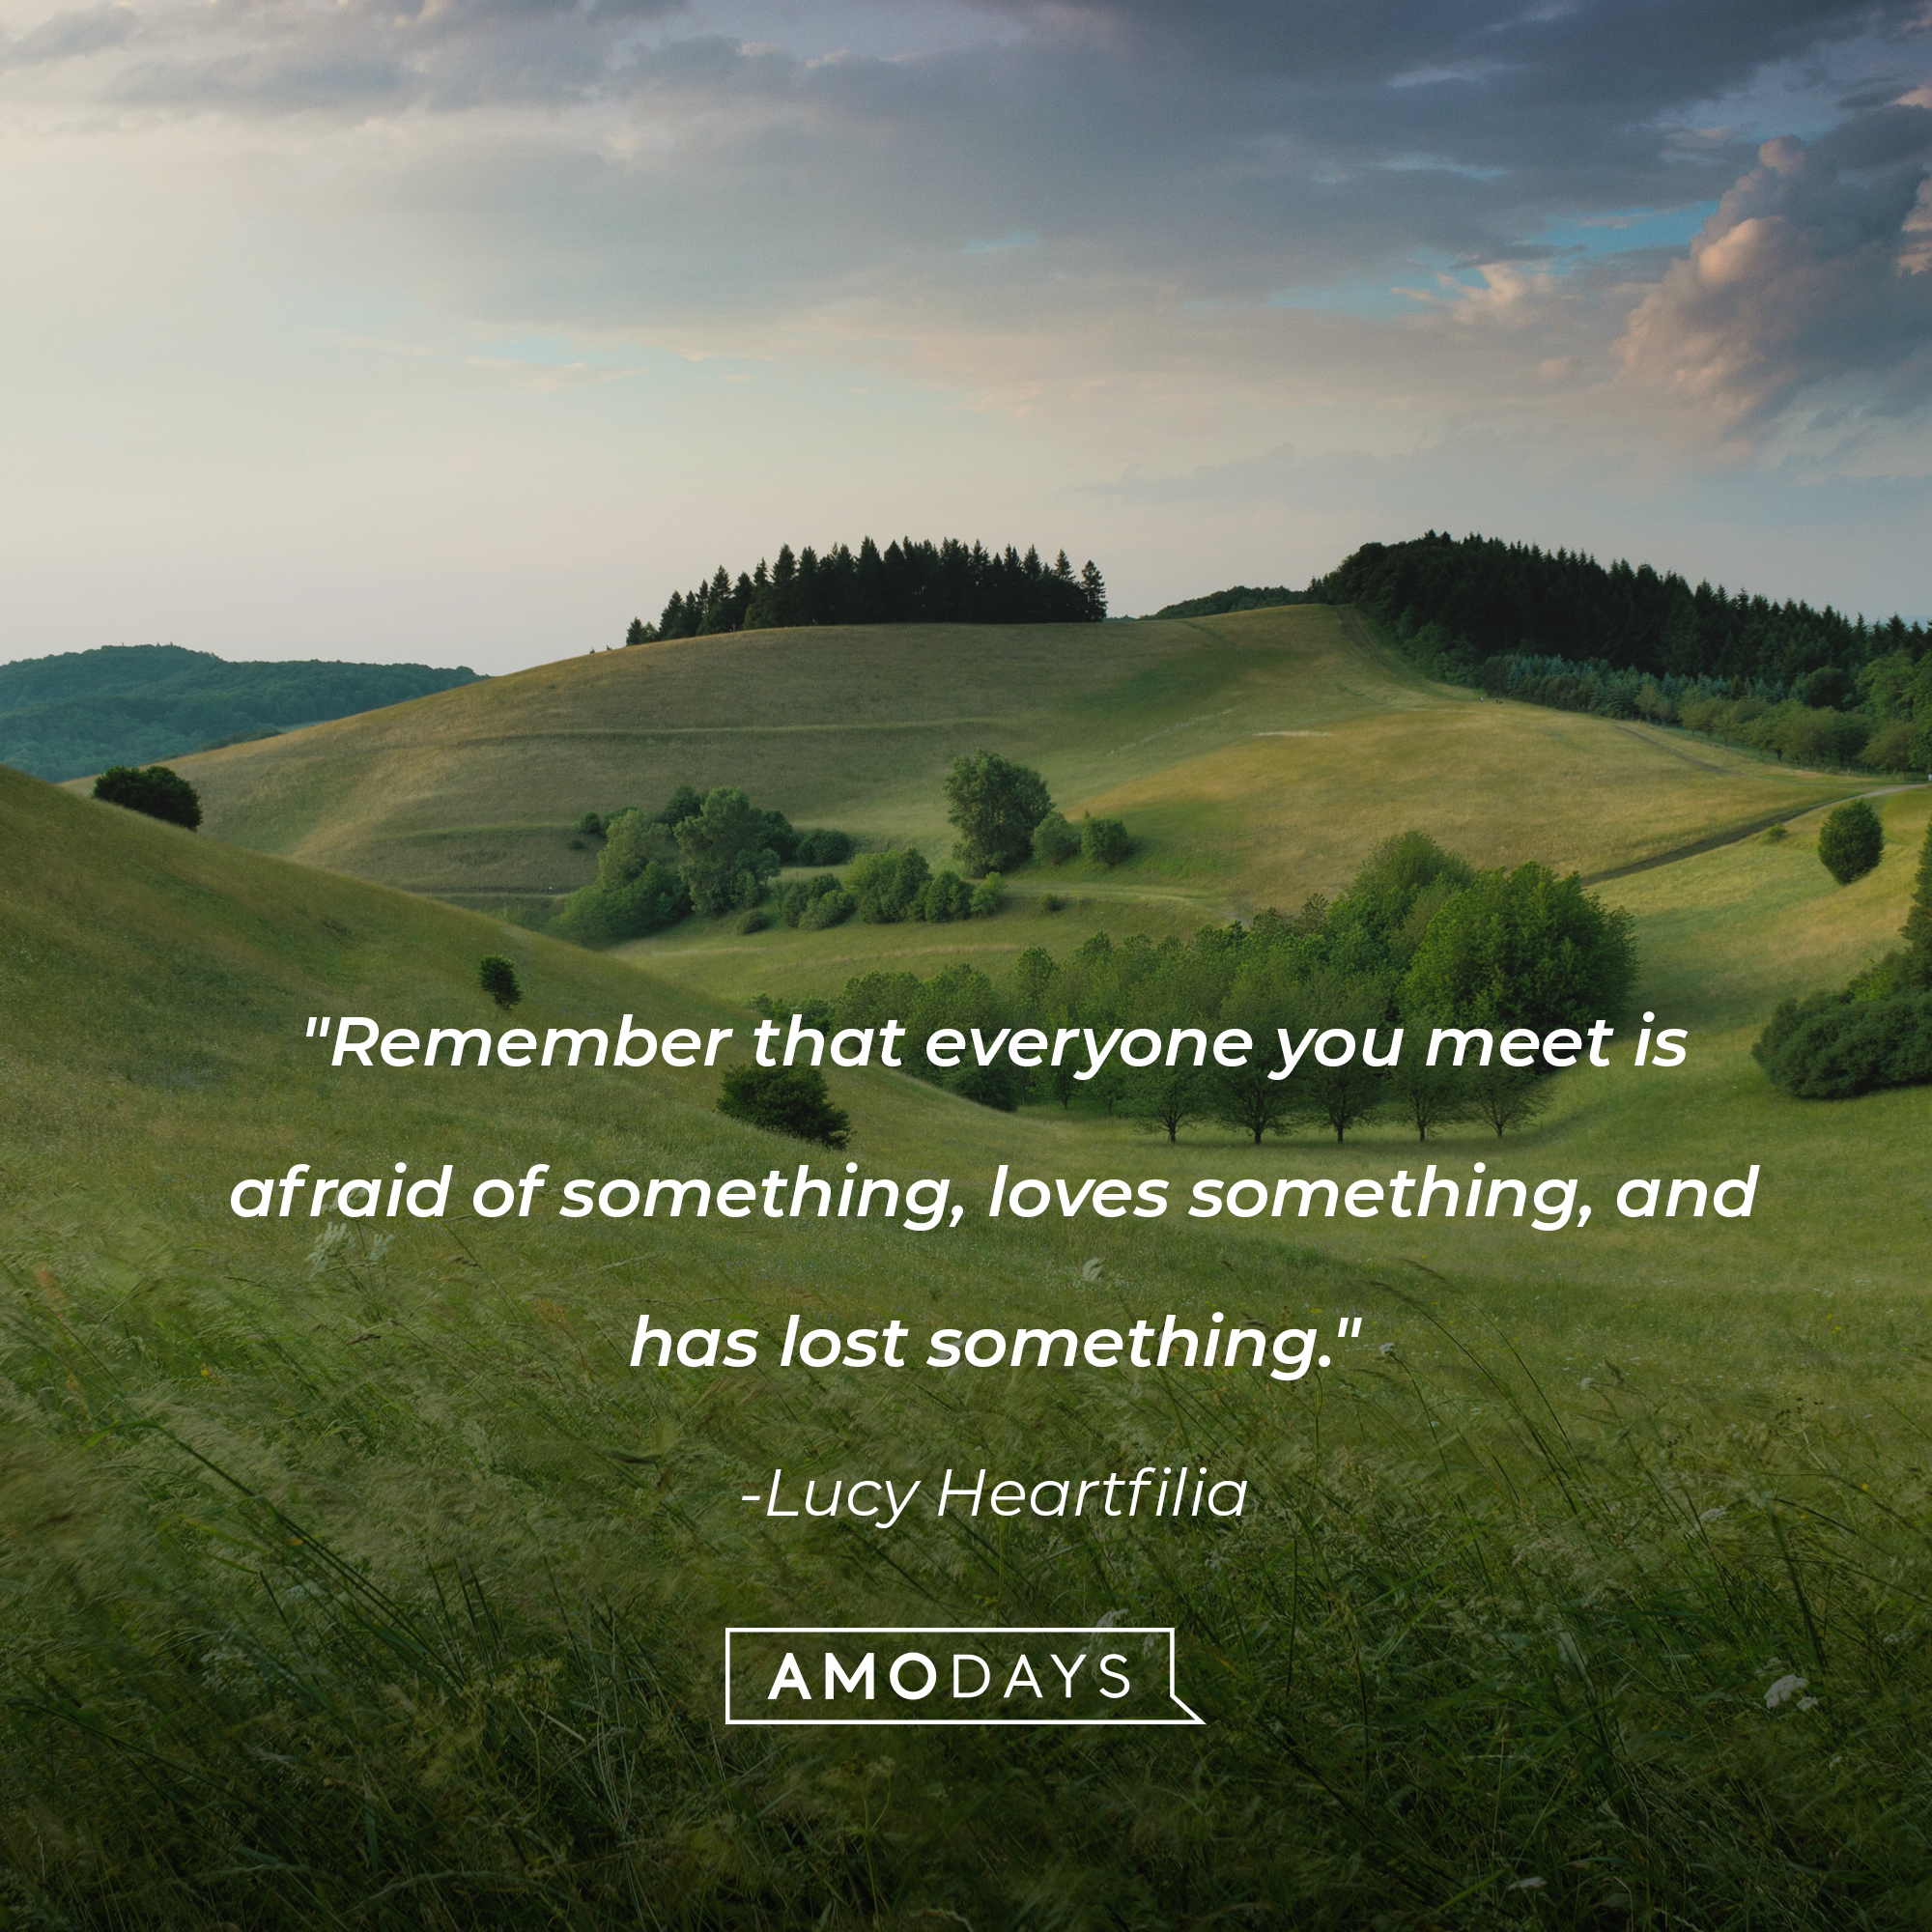 Lucy Heartfilia's quote: "Remember that everyone you meet is afraid of something, loves something, and has lost something." | Image: Unsplash